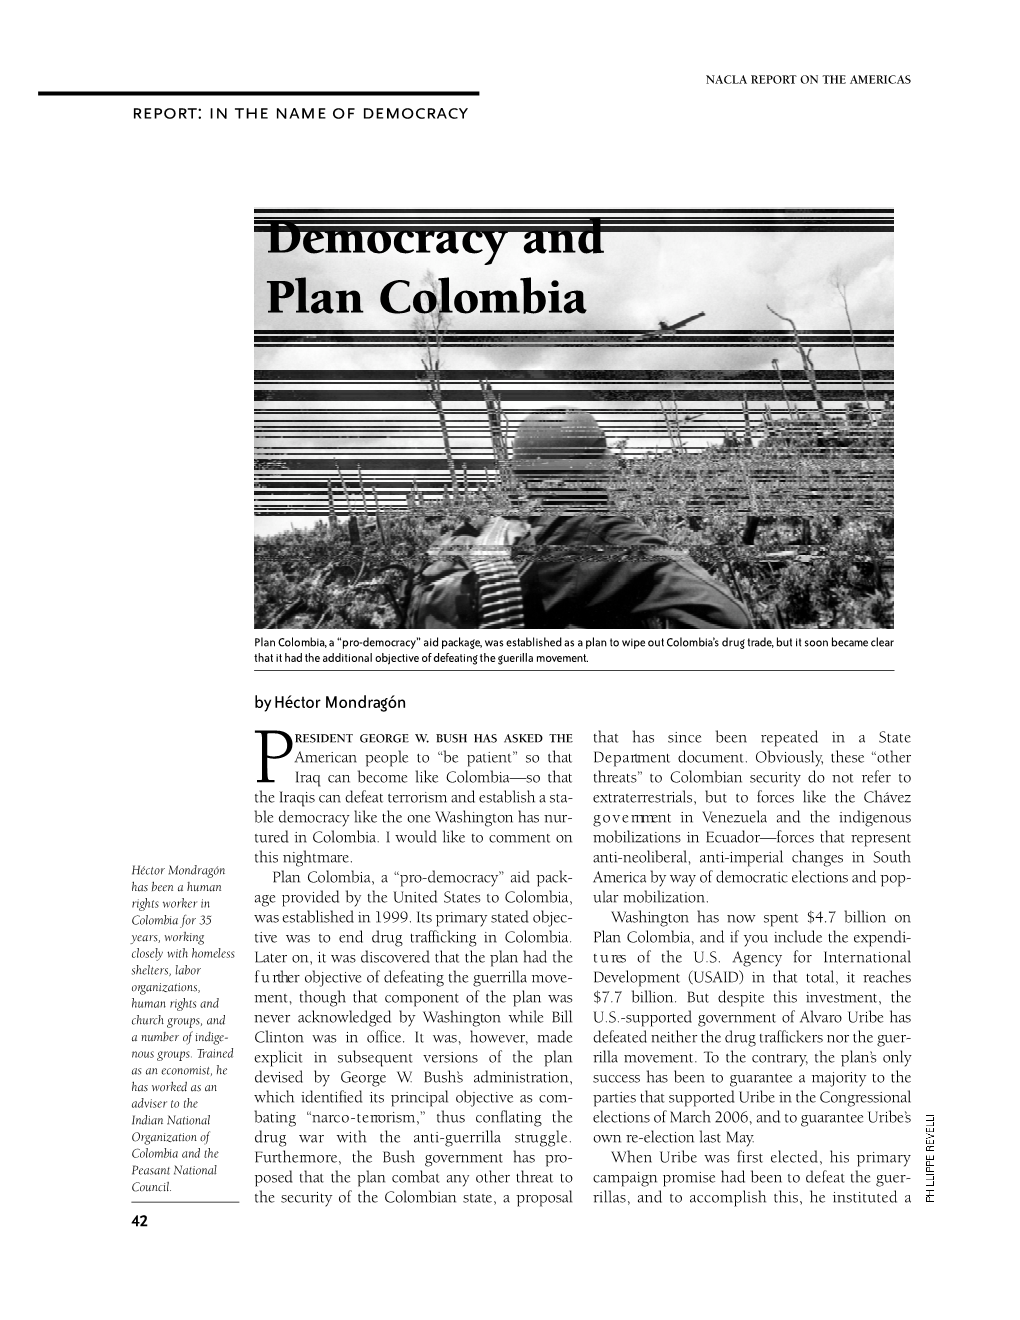 Democracy and Plan Colombia